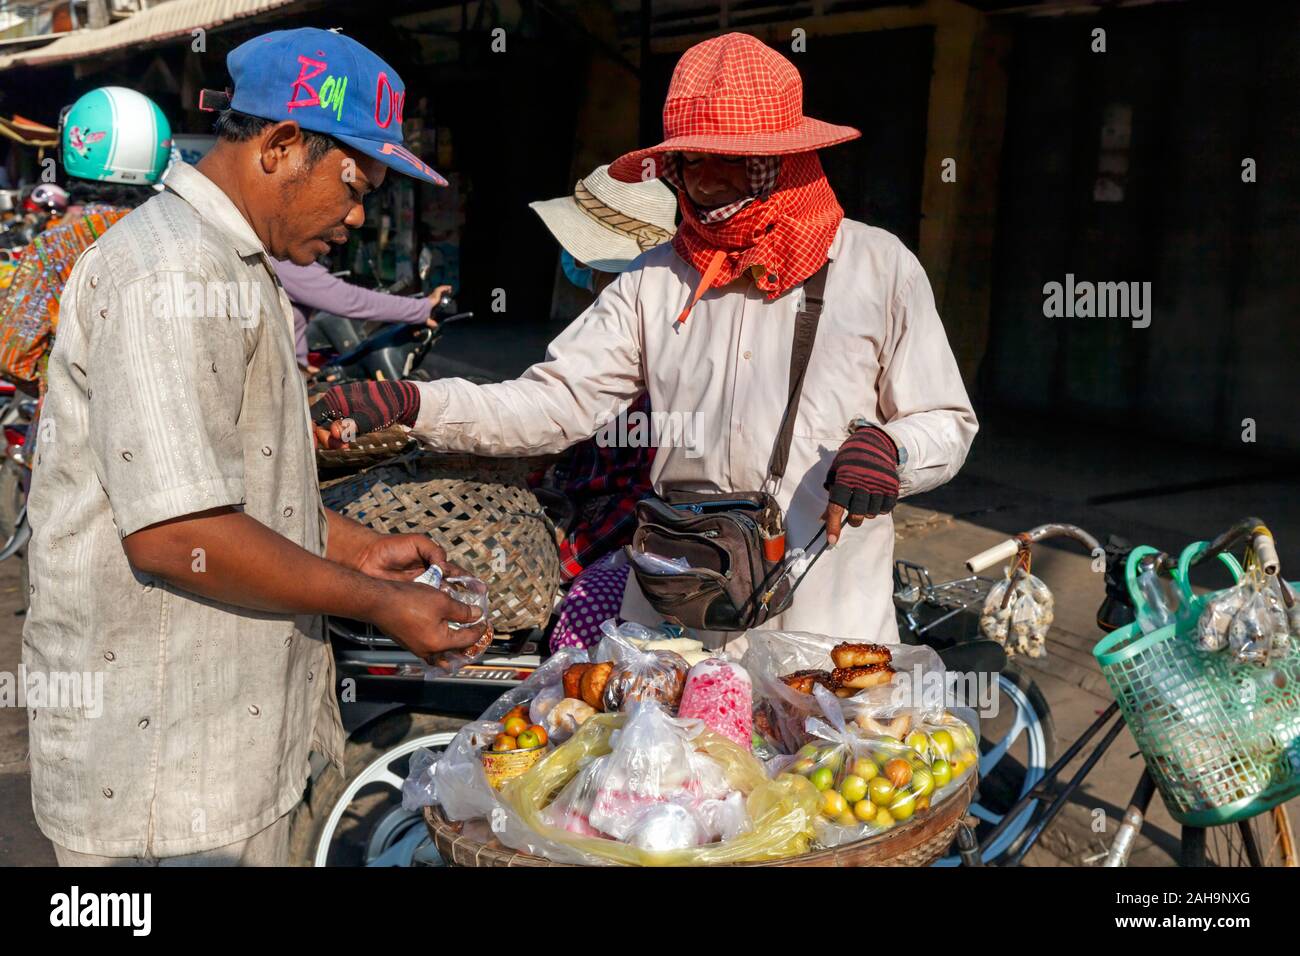 An Asian man is buying food from a woman selling fruit, desert and donuts strapped to her bicycle at a street market in Kampong Cham, Cambodia. Stock Photo